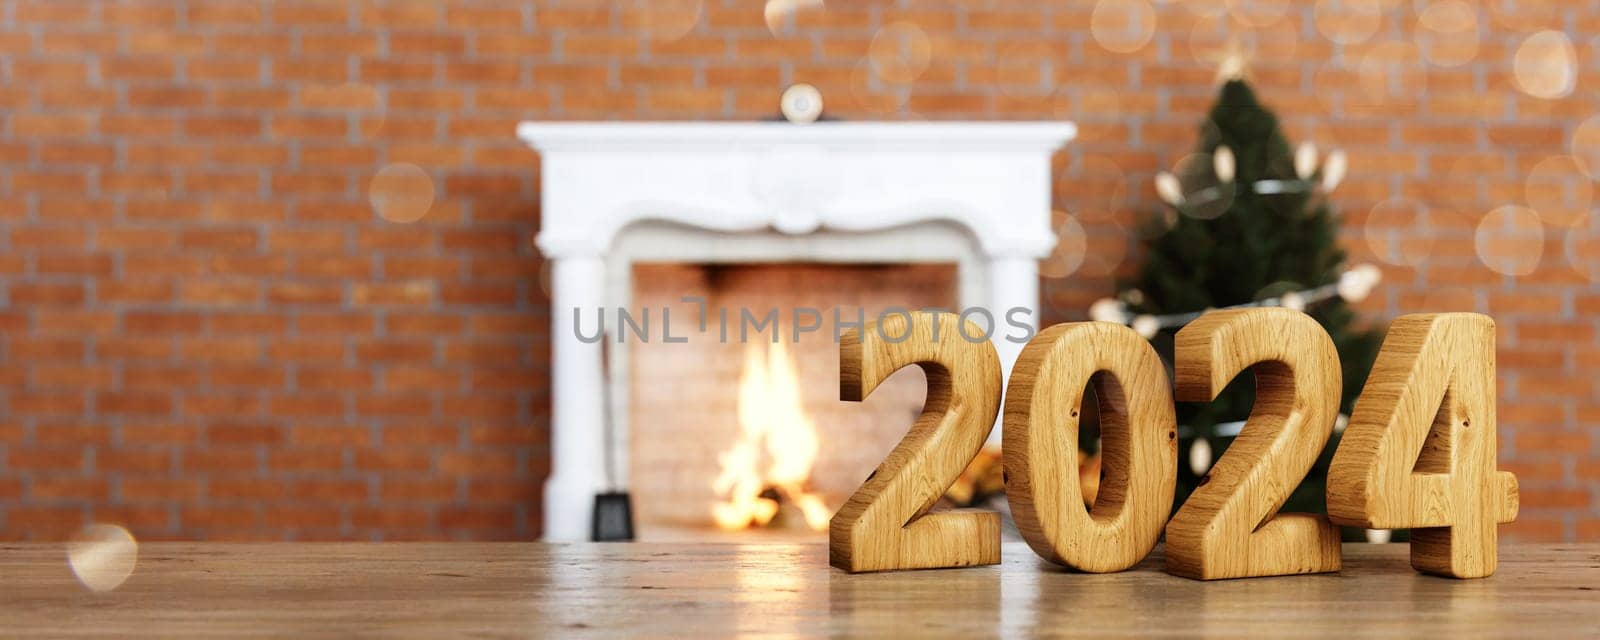 Merry christmas and happy new year. Christmas decoration living room. Festive cosy holiday background. 3D Rendering. 3D Illustration by meepiangraphic